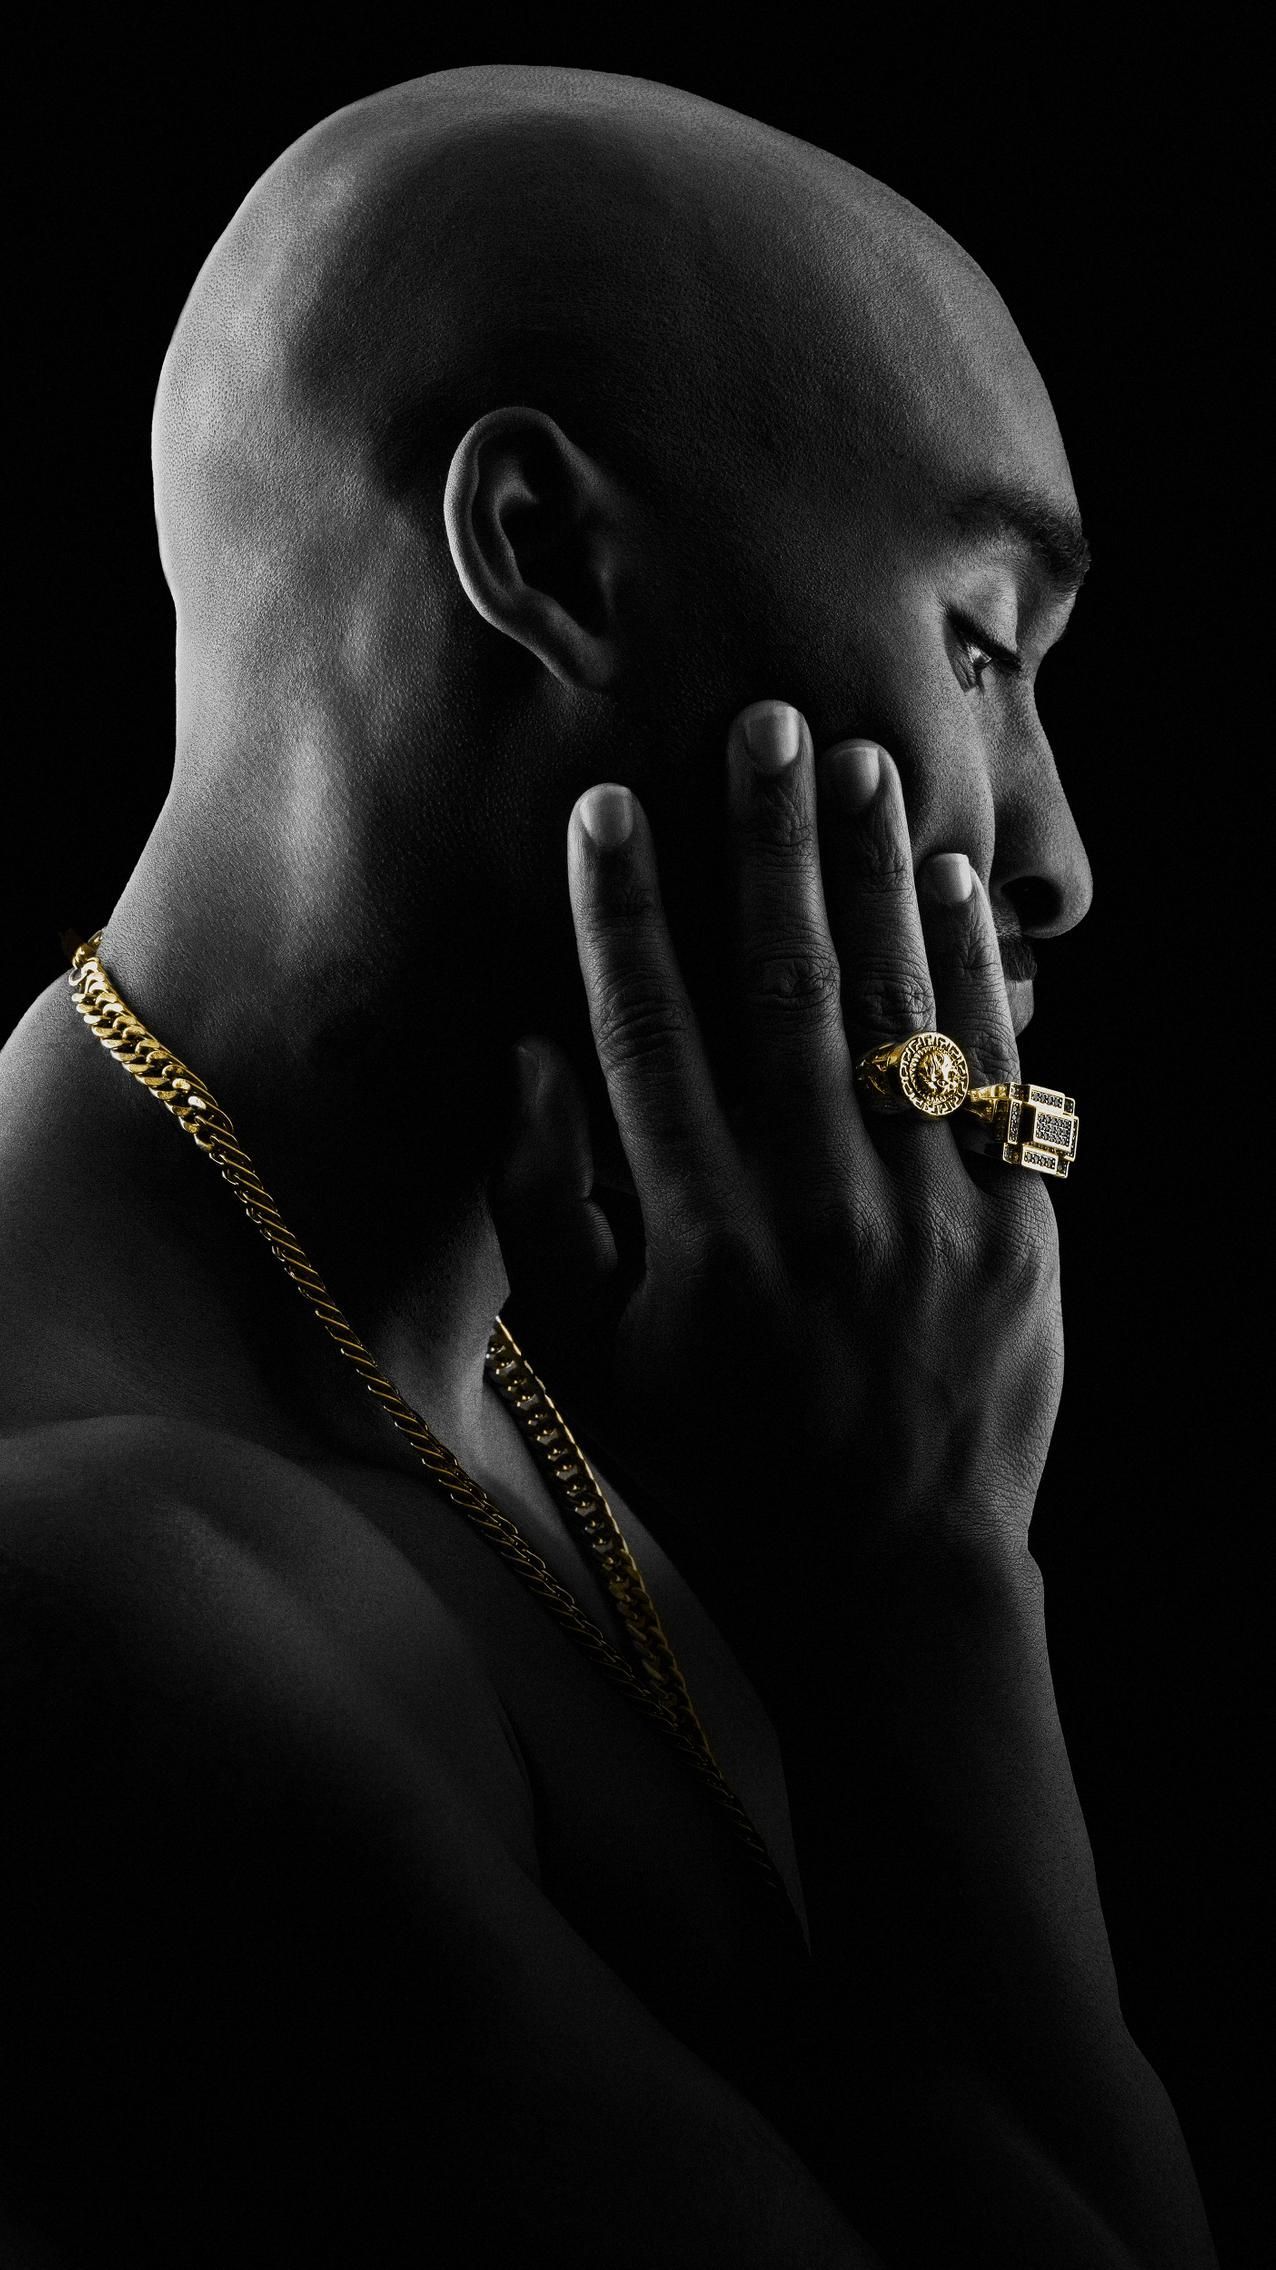 Download 2Pac wallpapers for mobile phone free 2Pac HD pictures